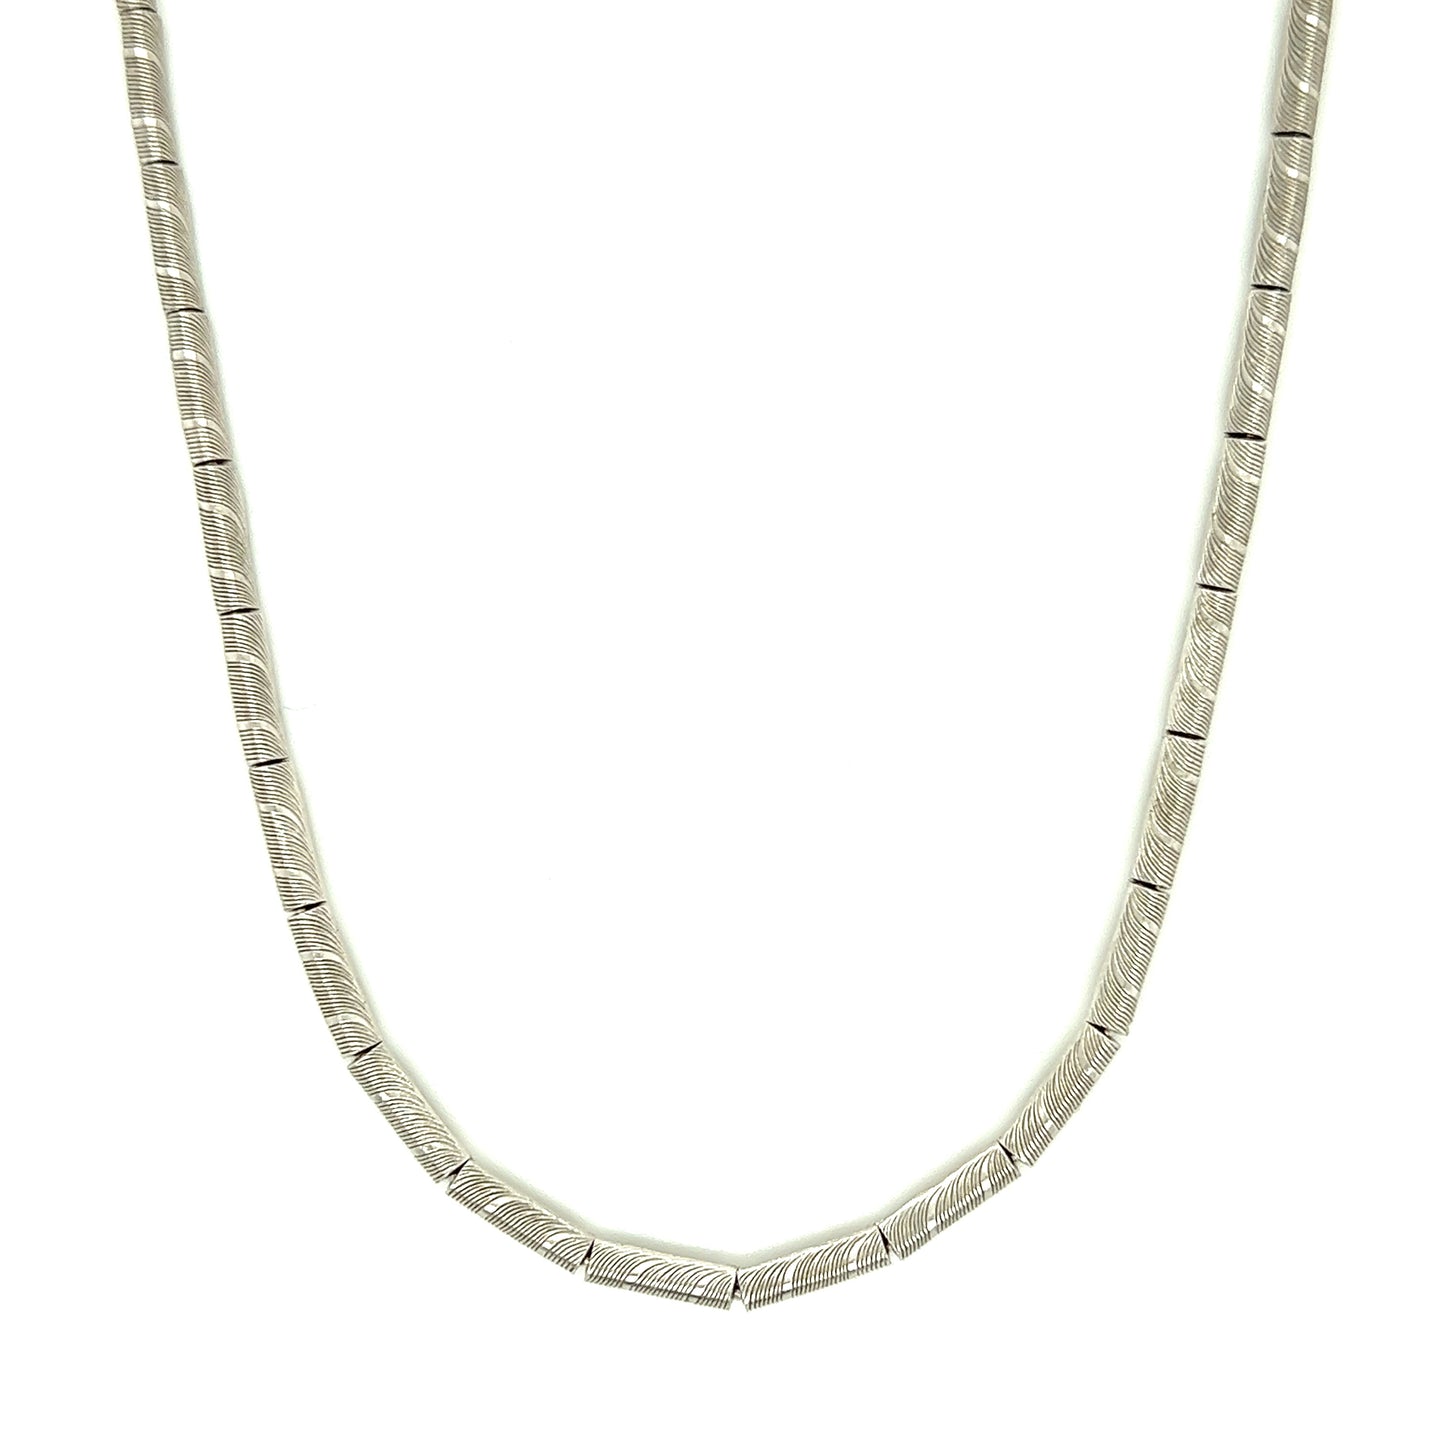 Textured Bar Link Necklace with Floral Claw Clasp in Sterling Silver Front View